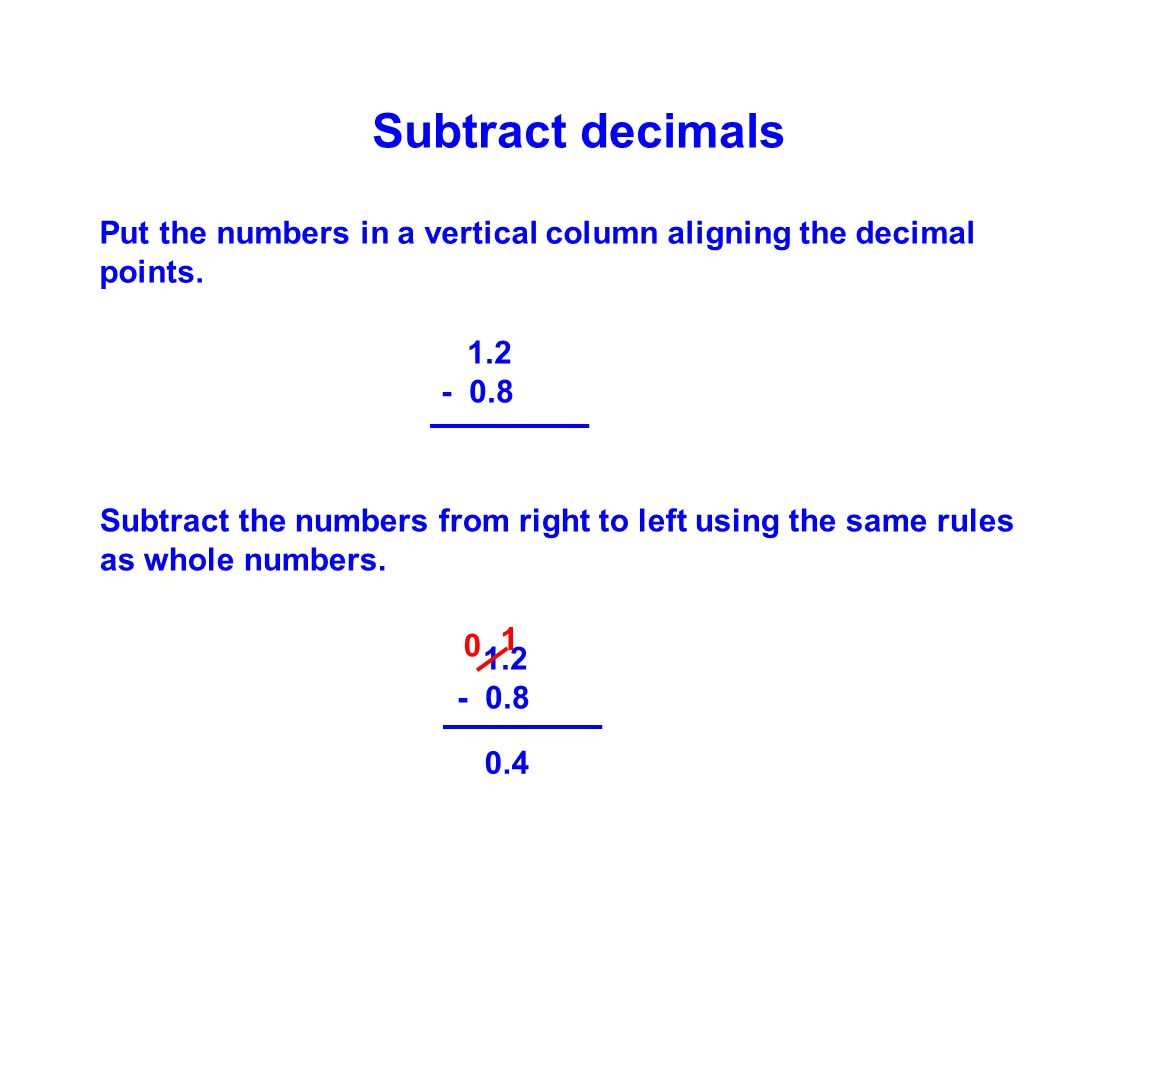 Put the numbers in a vertical column aligning the decimal points.